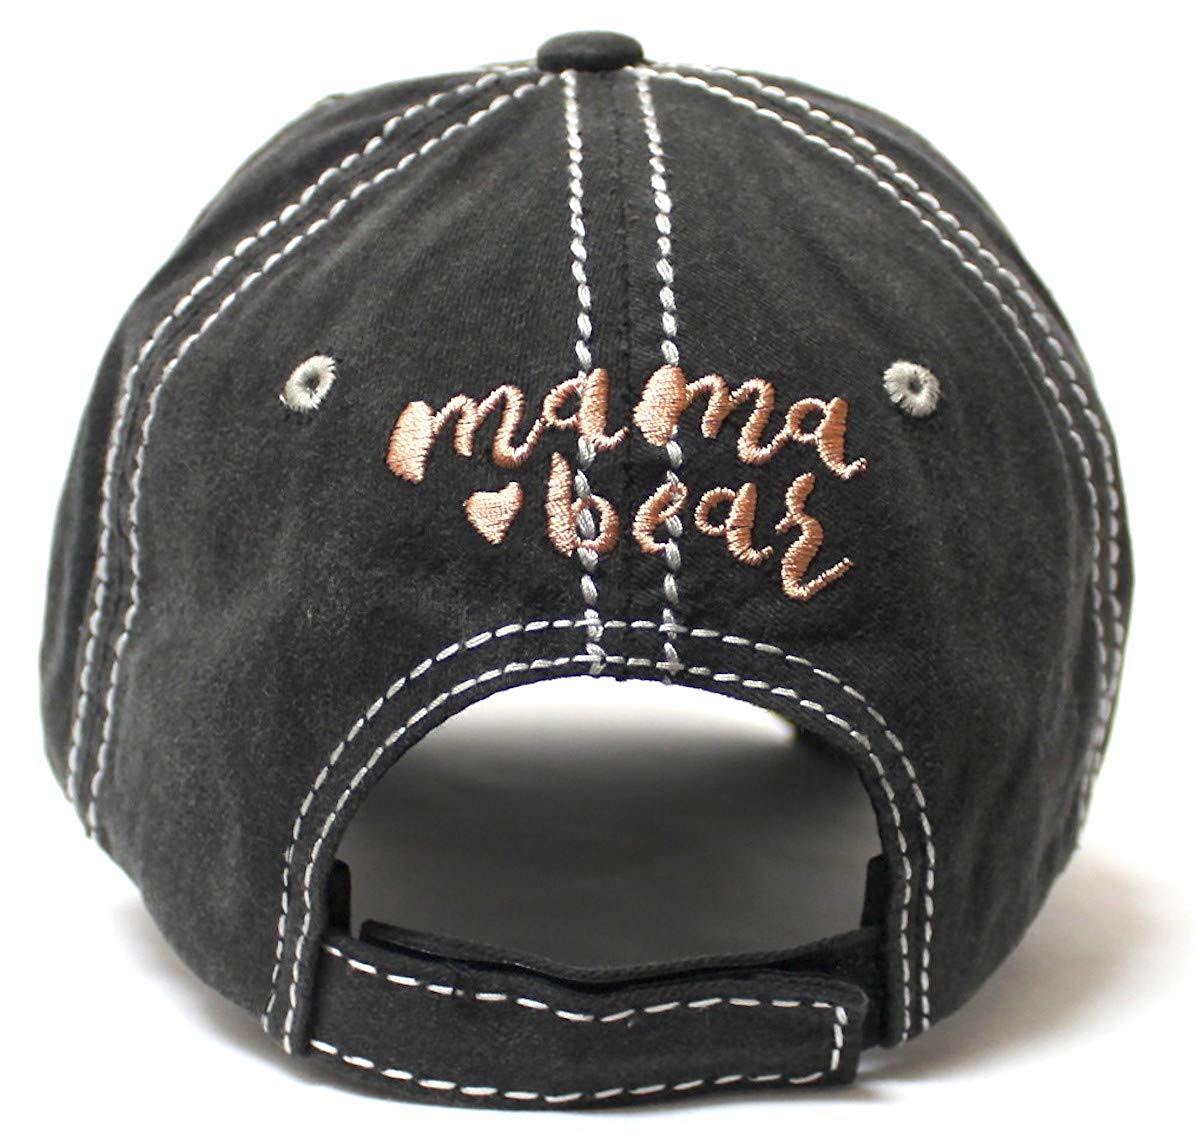 Women's Ballcap Mama Bear Floral Print Patch Rose Gold Embroidery Unconstructed Hat, Vintage Black - Caps 'N Vintage 